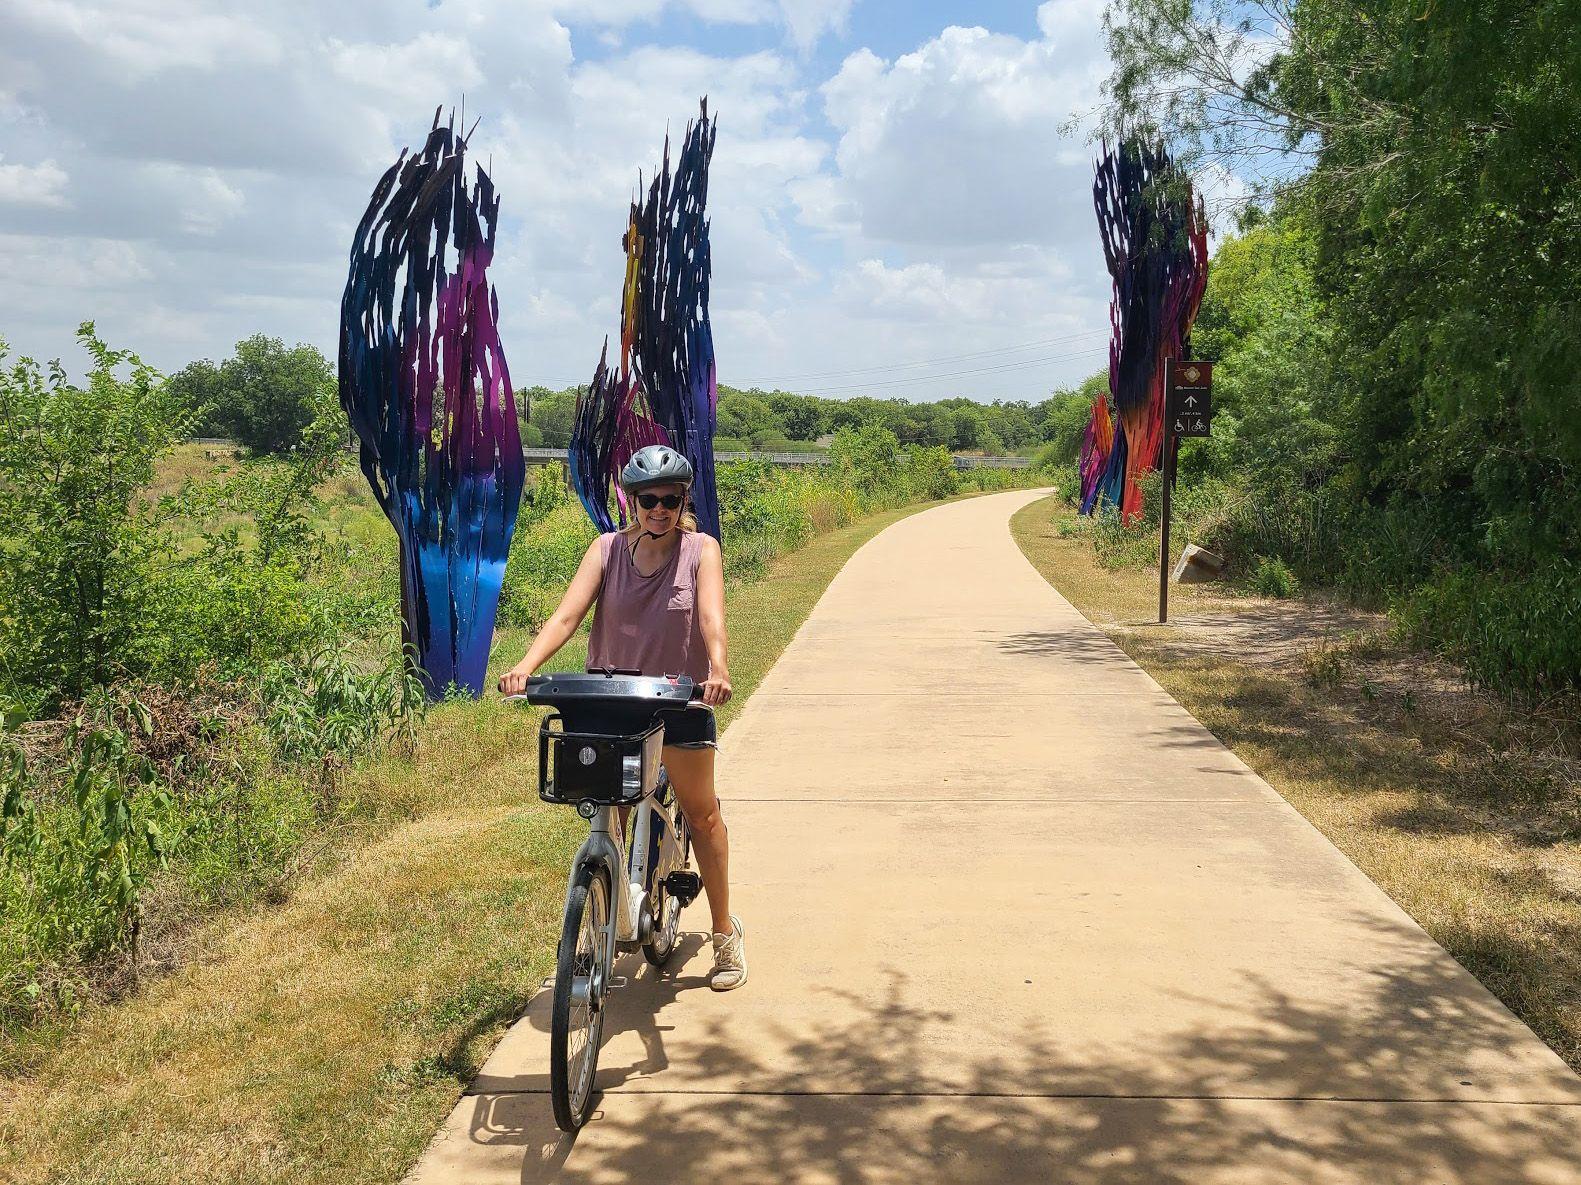 Lydia riding a bike on a paved path with a colorful sculpture behind her on each side of the trail.